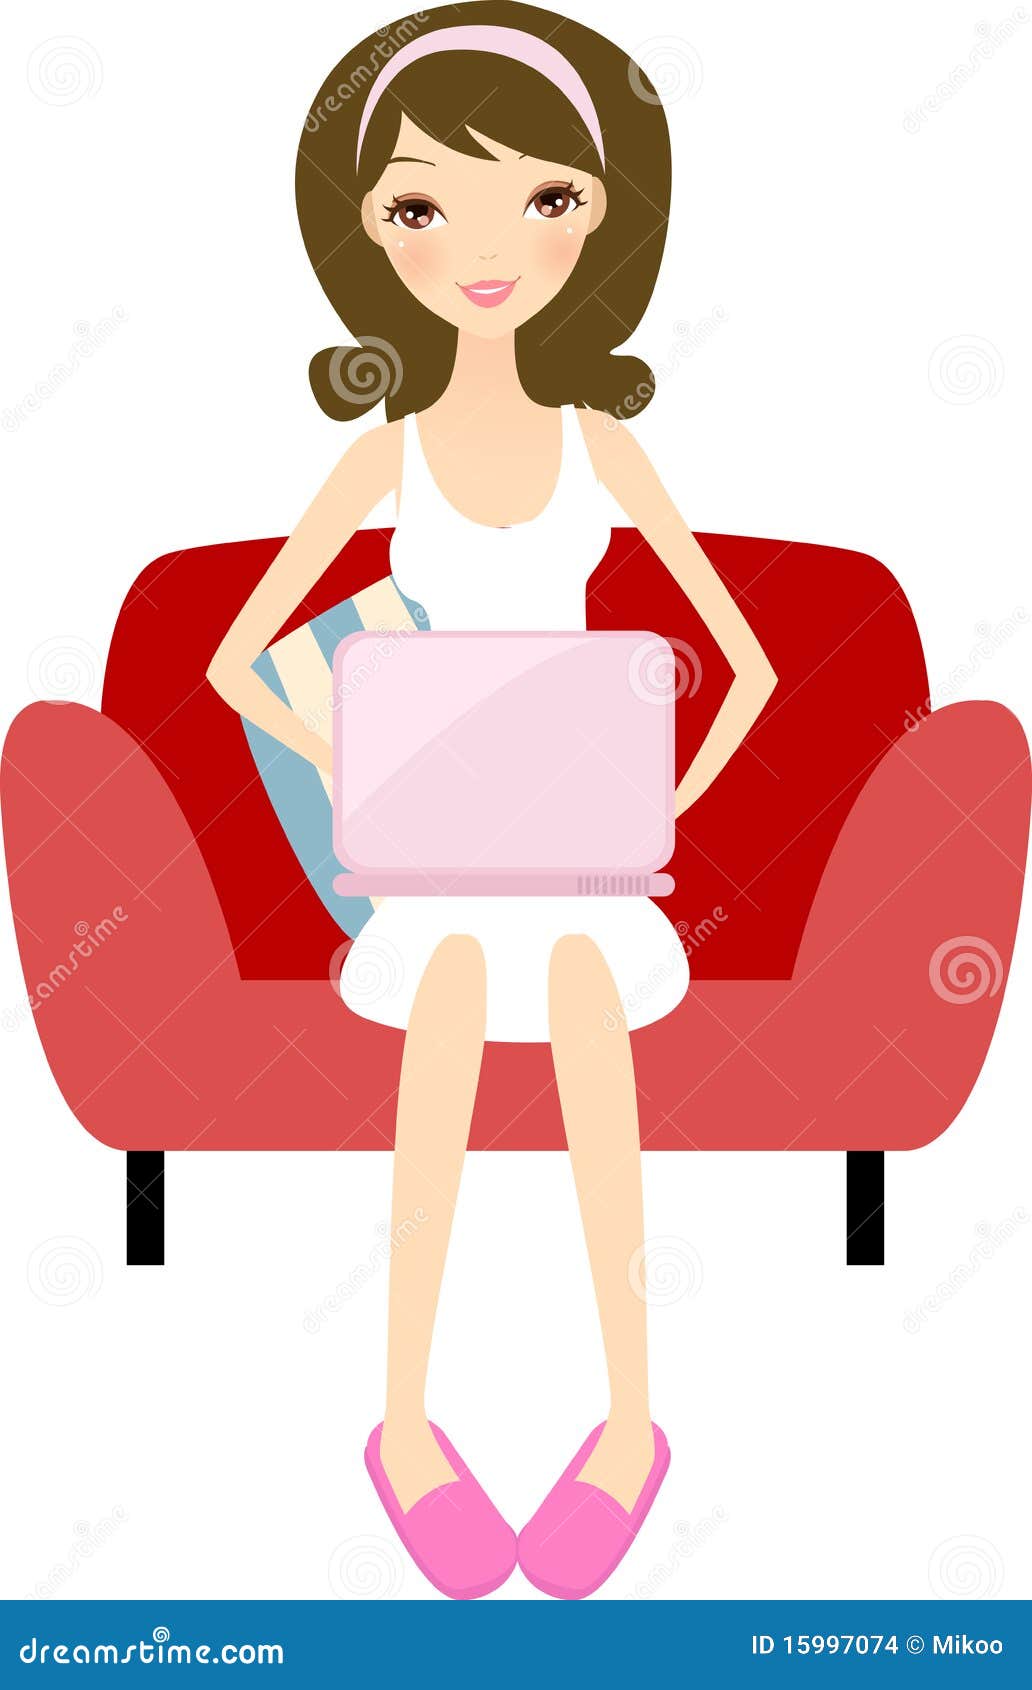 girl relaxing clipart - photo #8